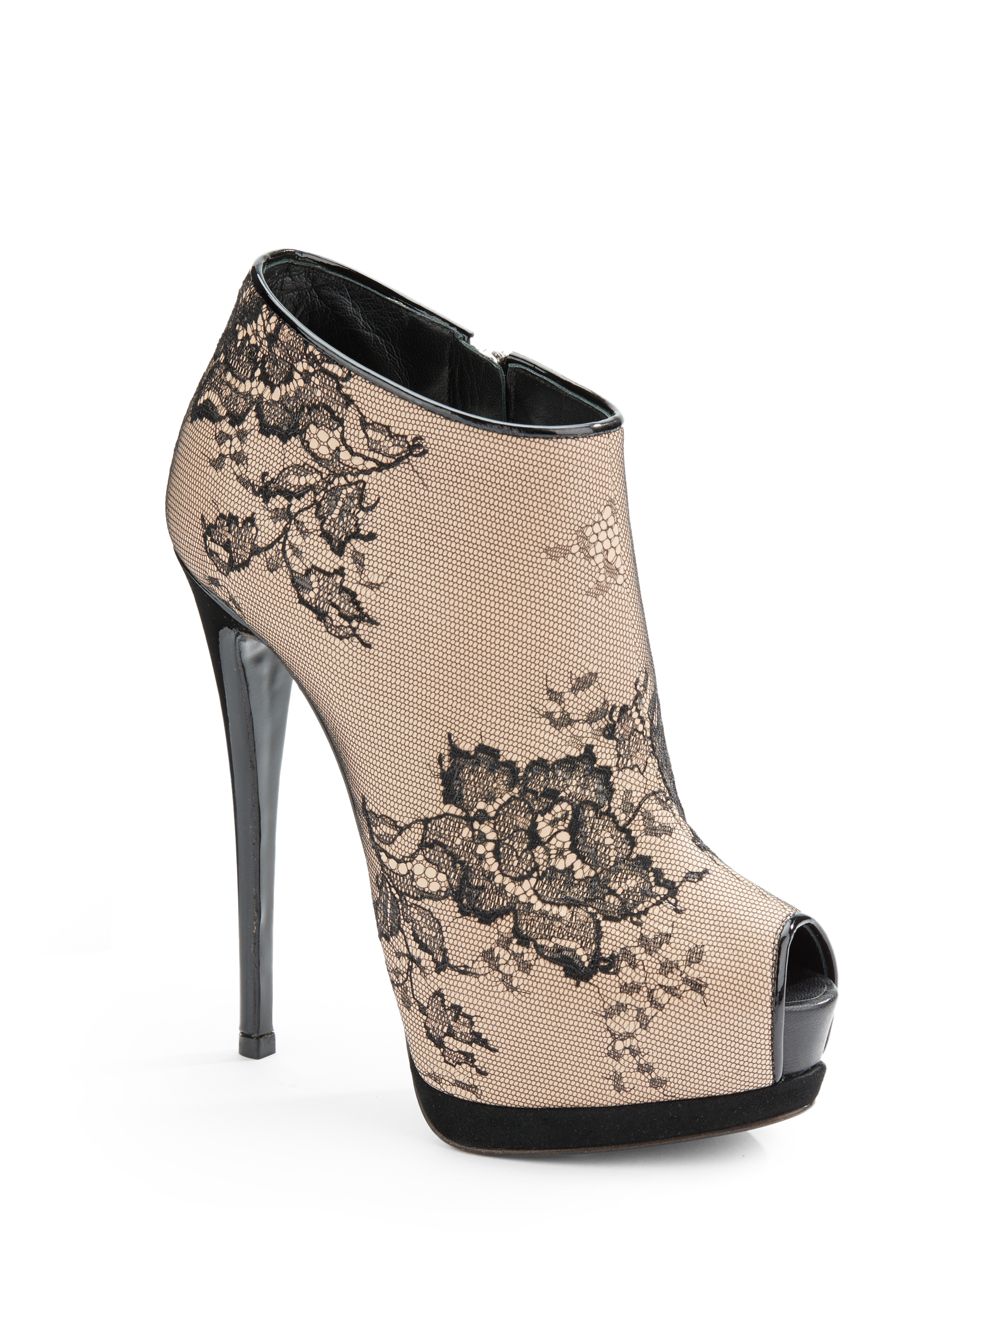 Lyst - Giuseppe Zanotti Lace Overlay Ankle Boots in Black